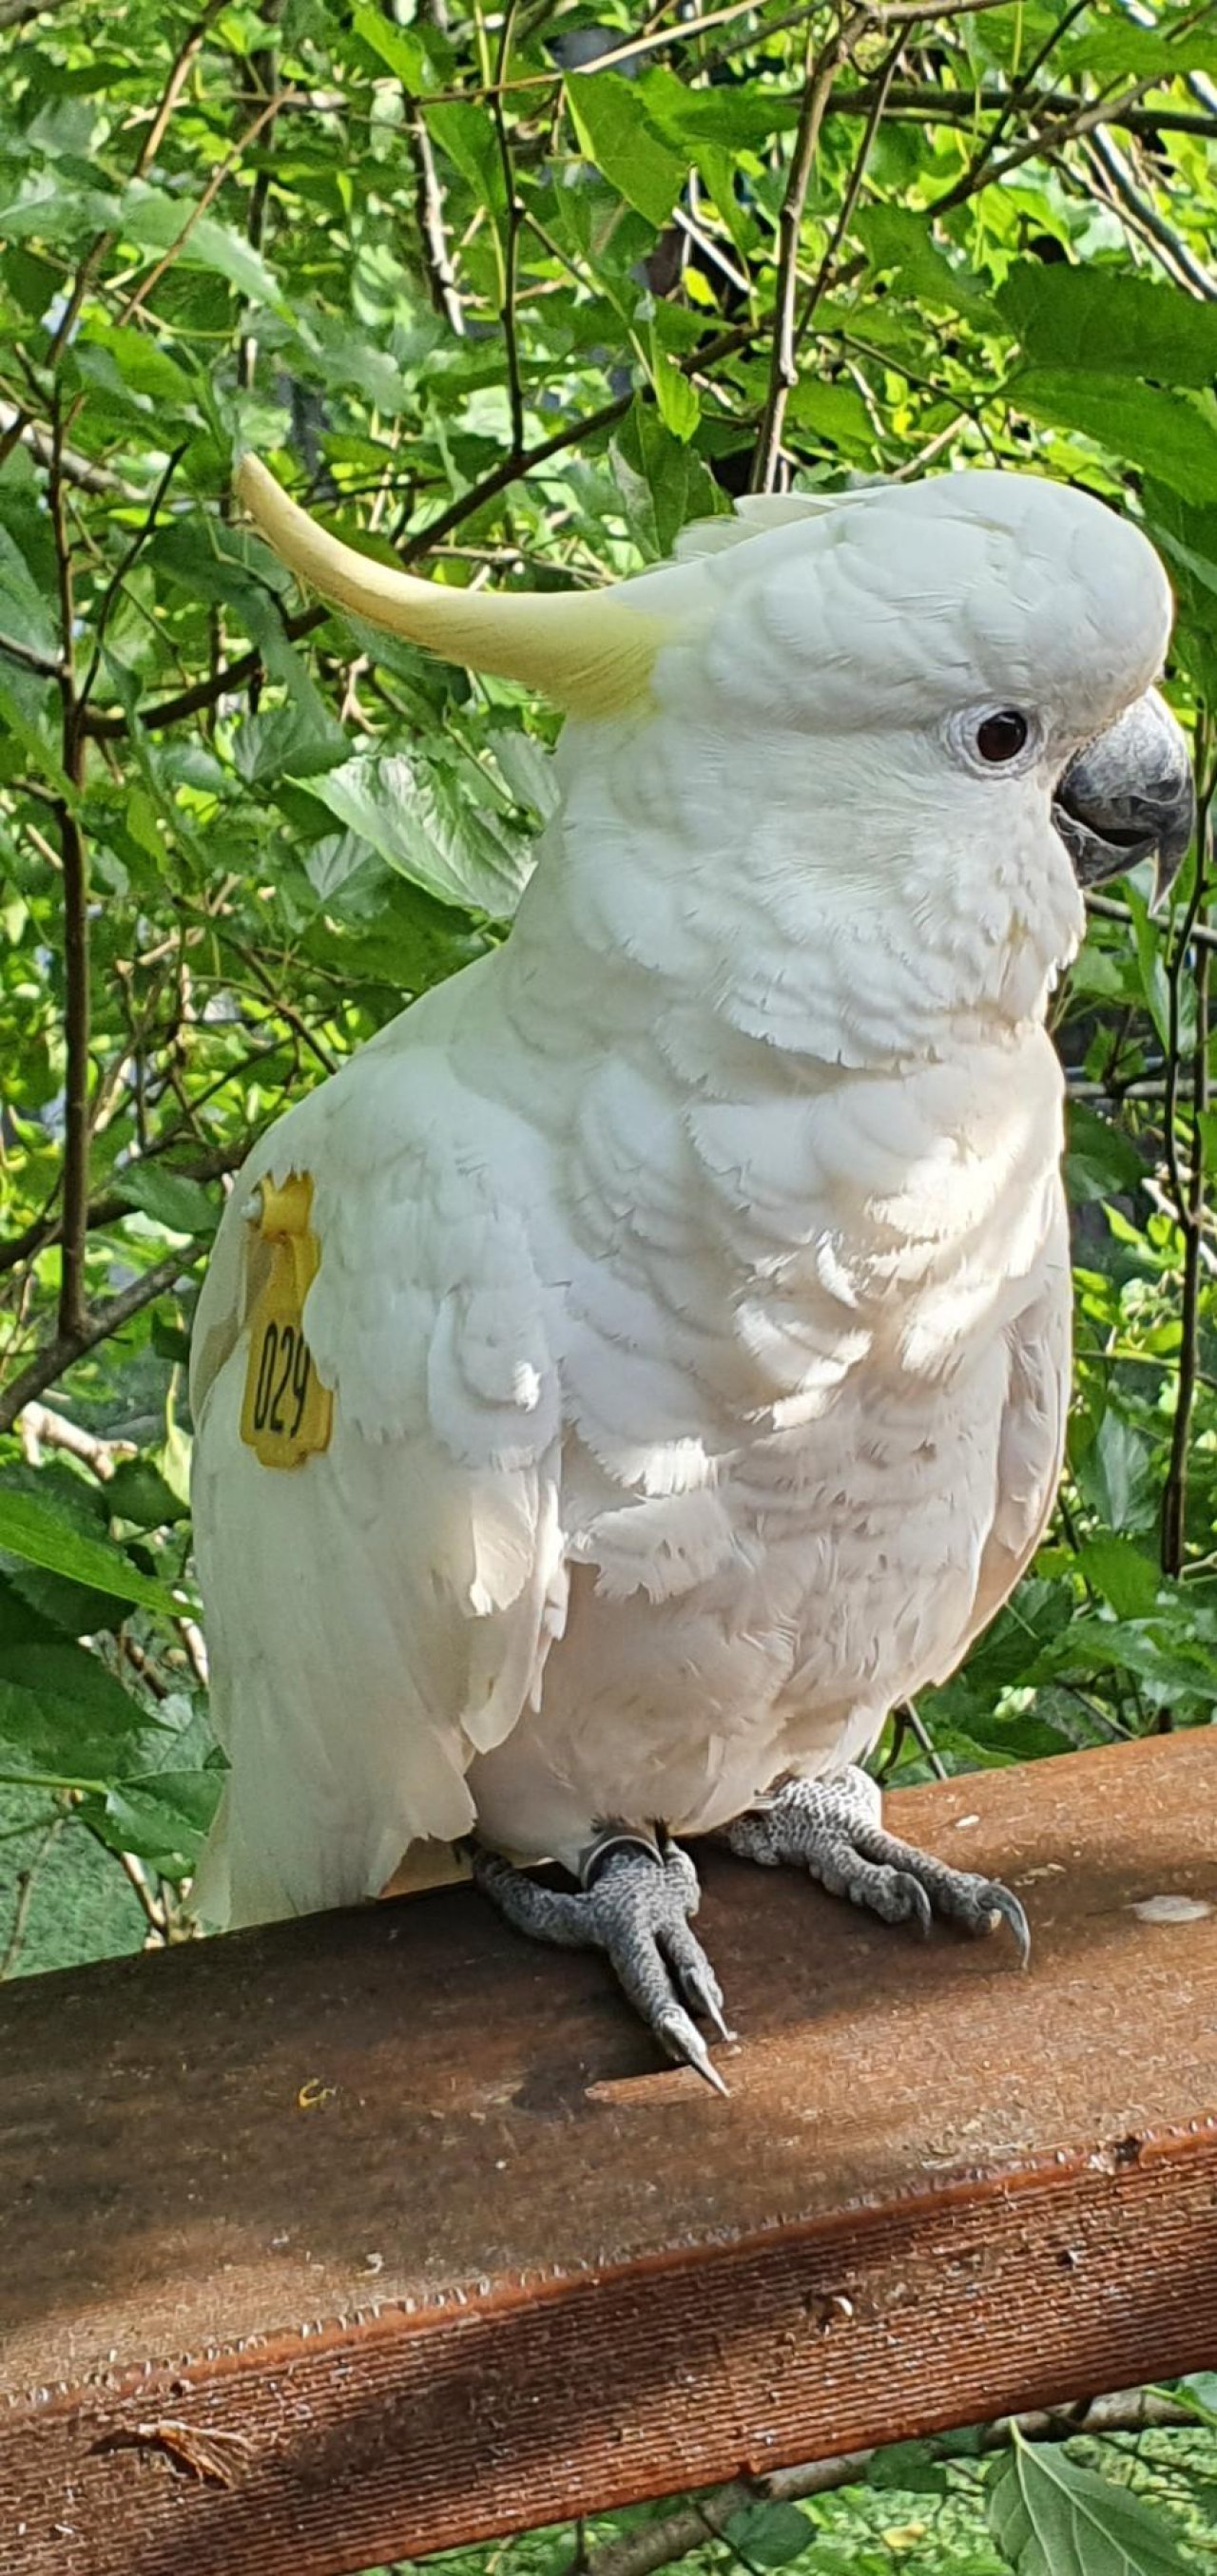 Sulphur-crested Cockatoo in Big City Birds App spotted by Fullersrd on 23.12.2020